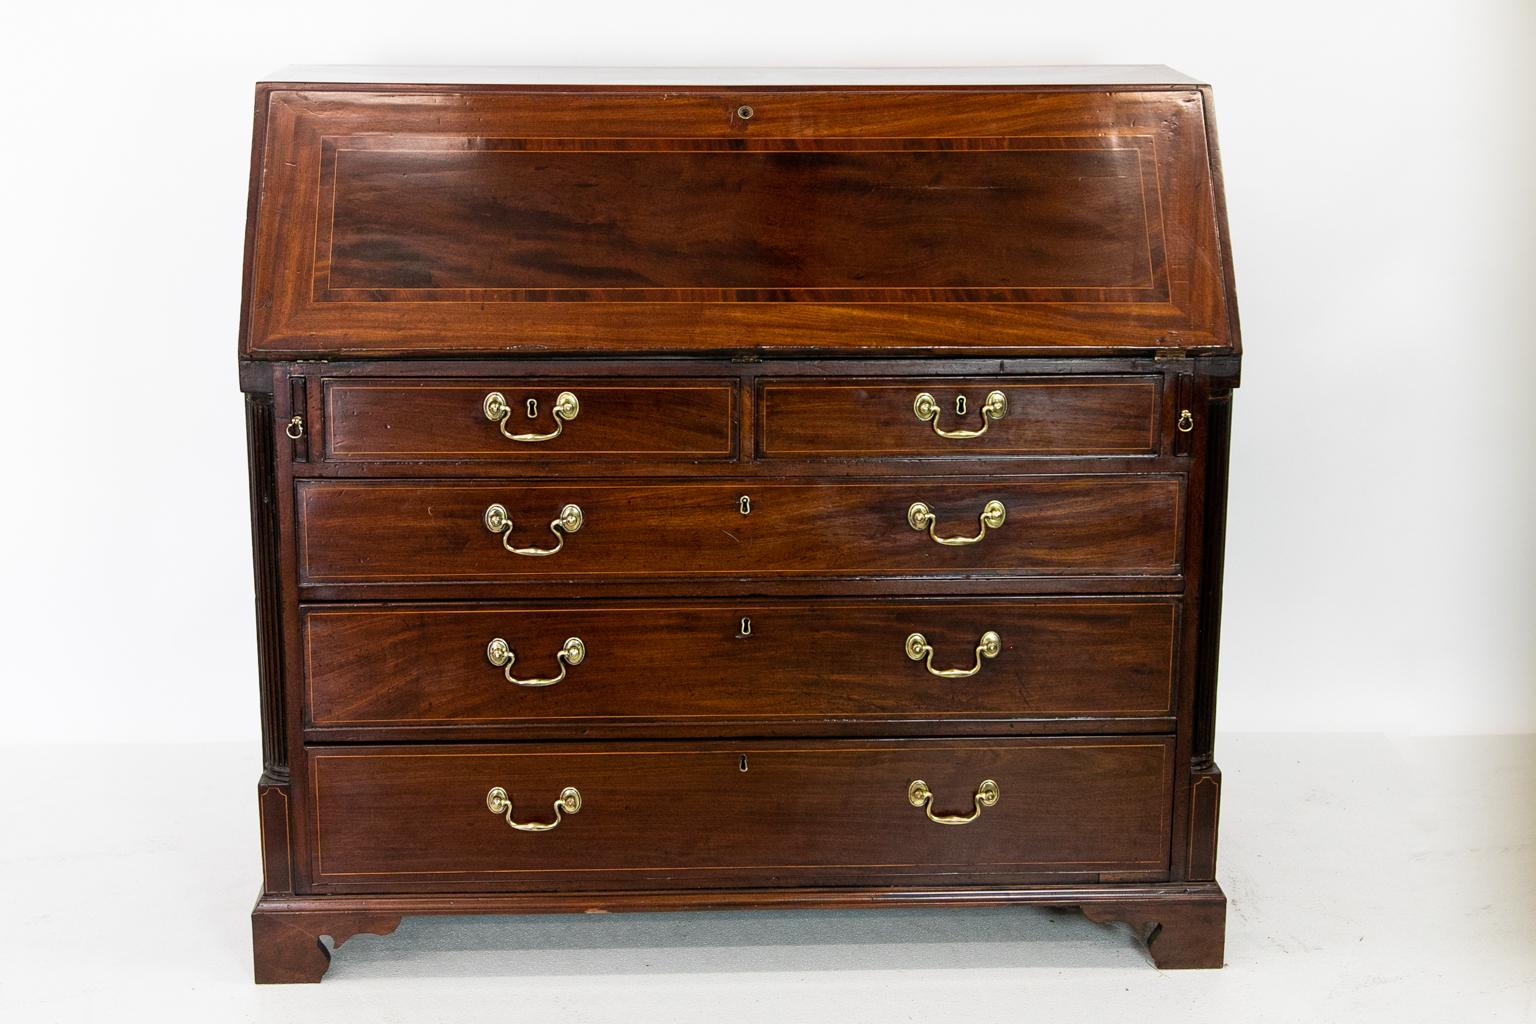 English George III slant front desk is inlaid with boxwood line and crossbanded in mahogany. The interior has inlaid pilasters with secret compartments. There are multiple arched cubby holes.